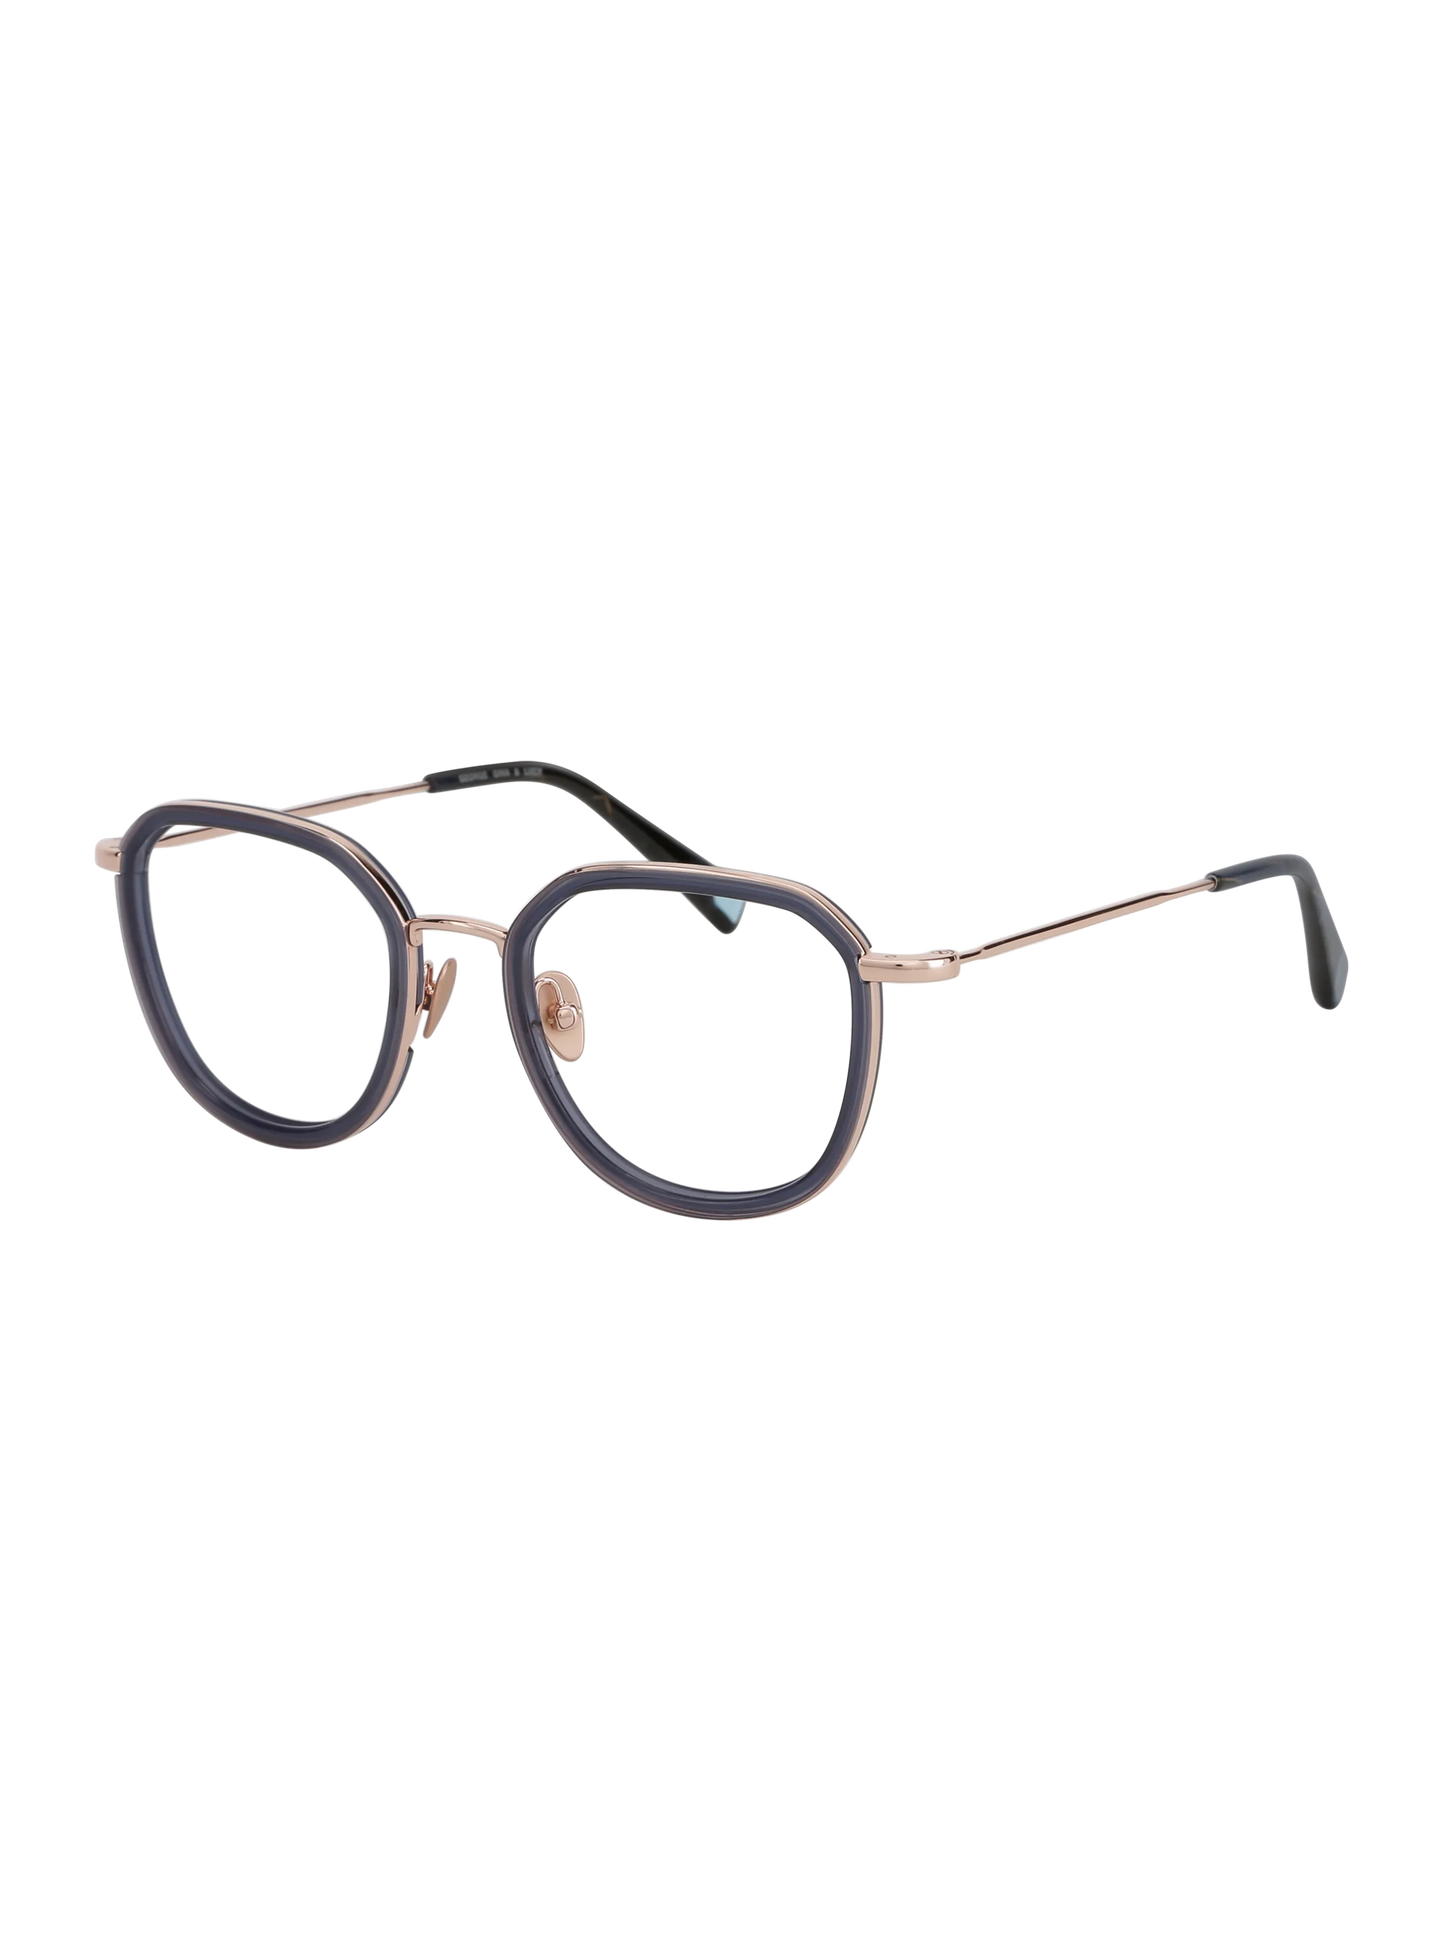 Farbe_clear blue rosegold 003